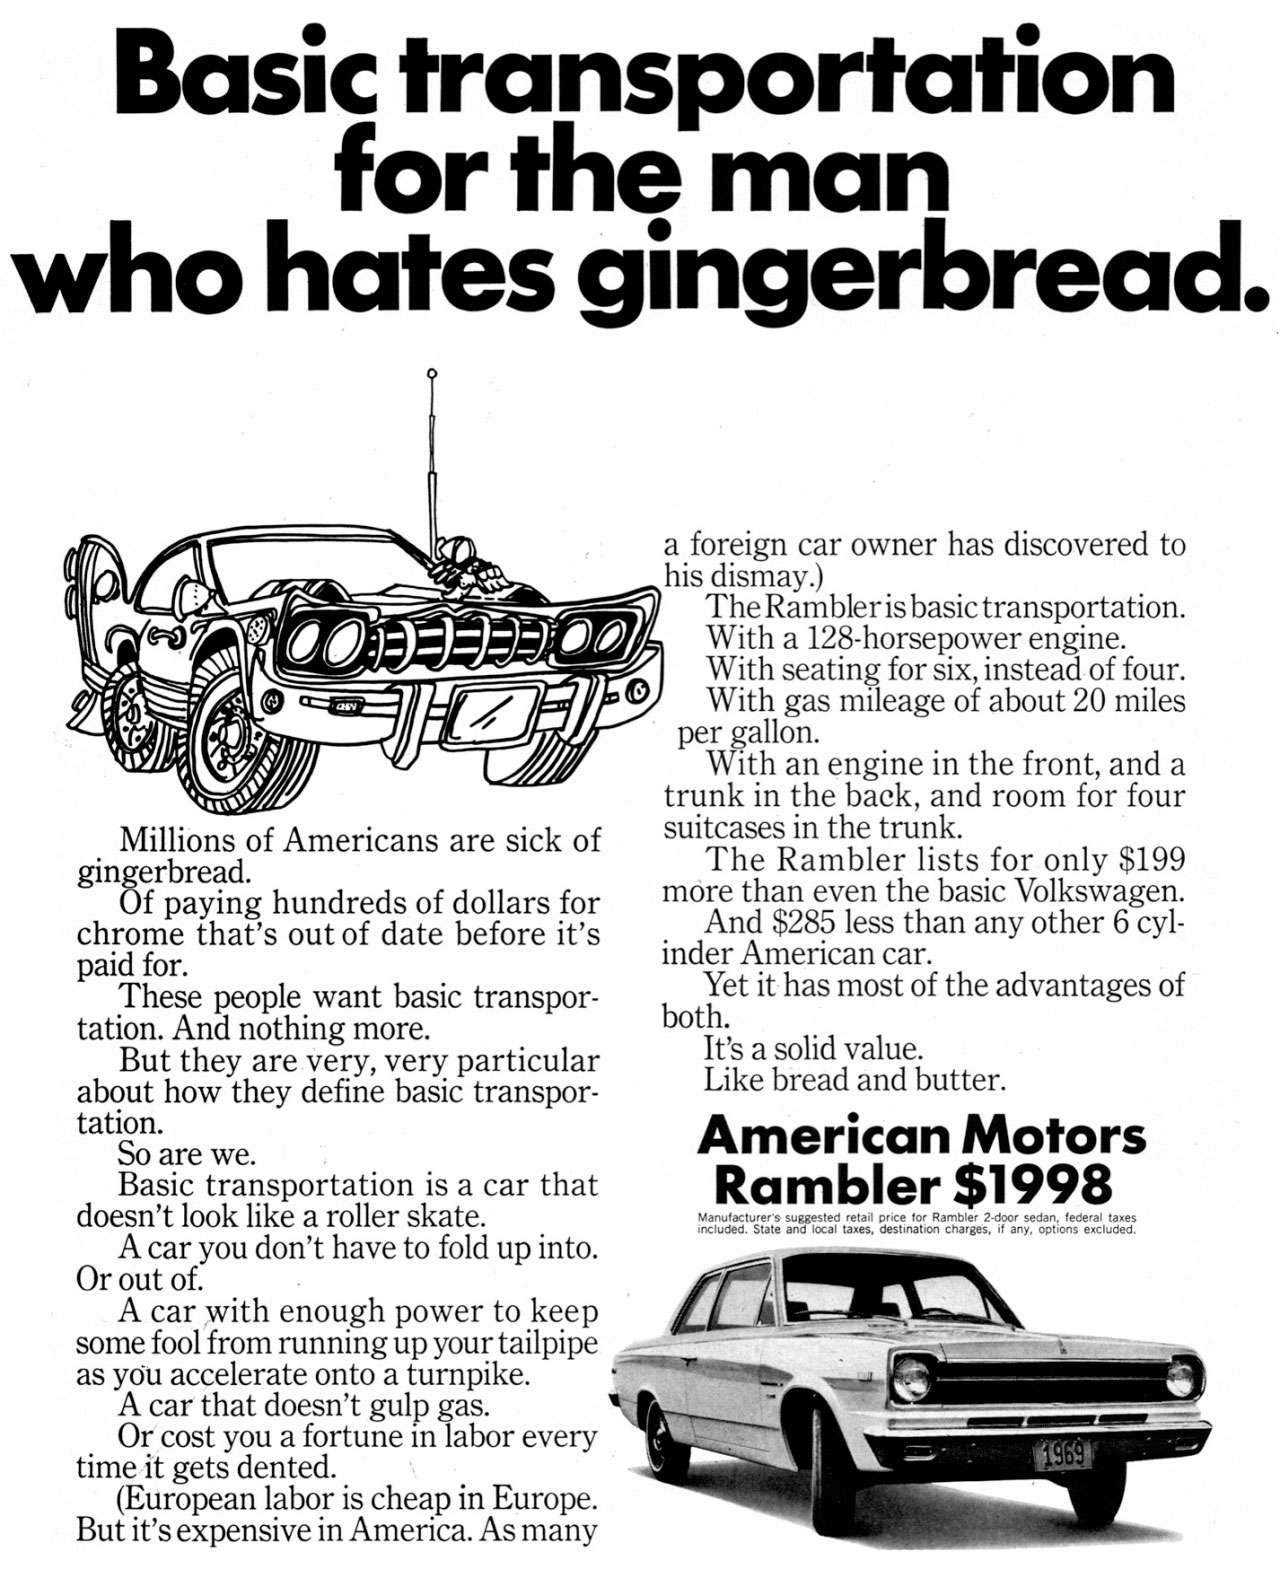 The American Motors Rambler. Basic transportation for the man who hates gingerbread.